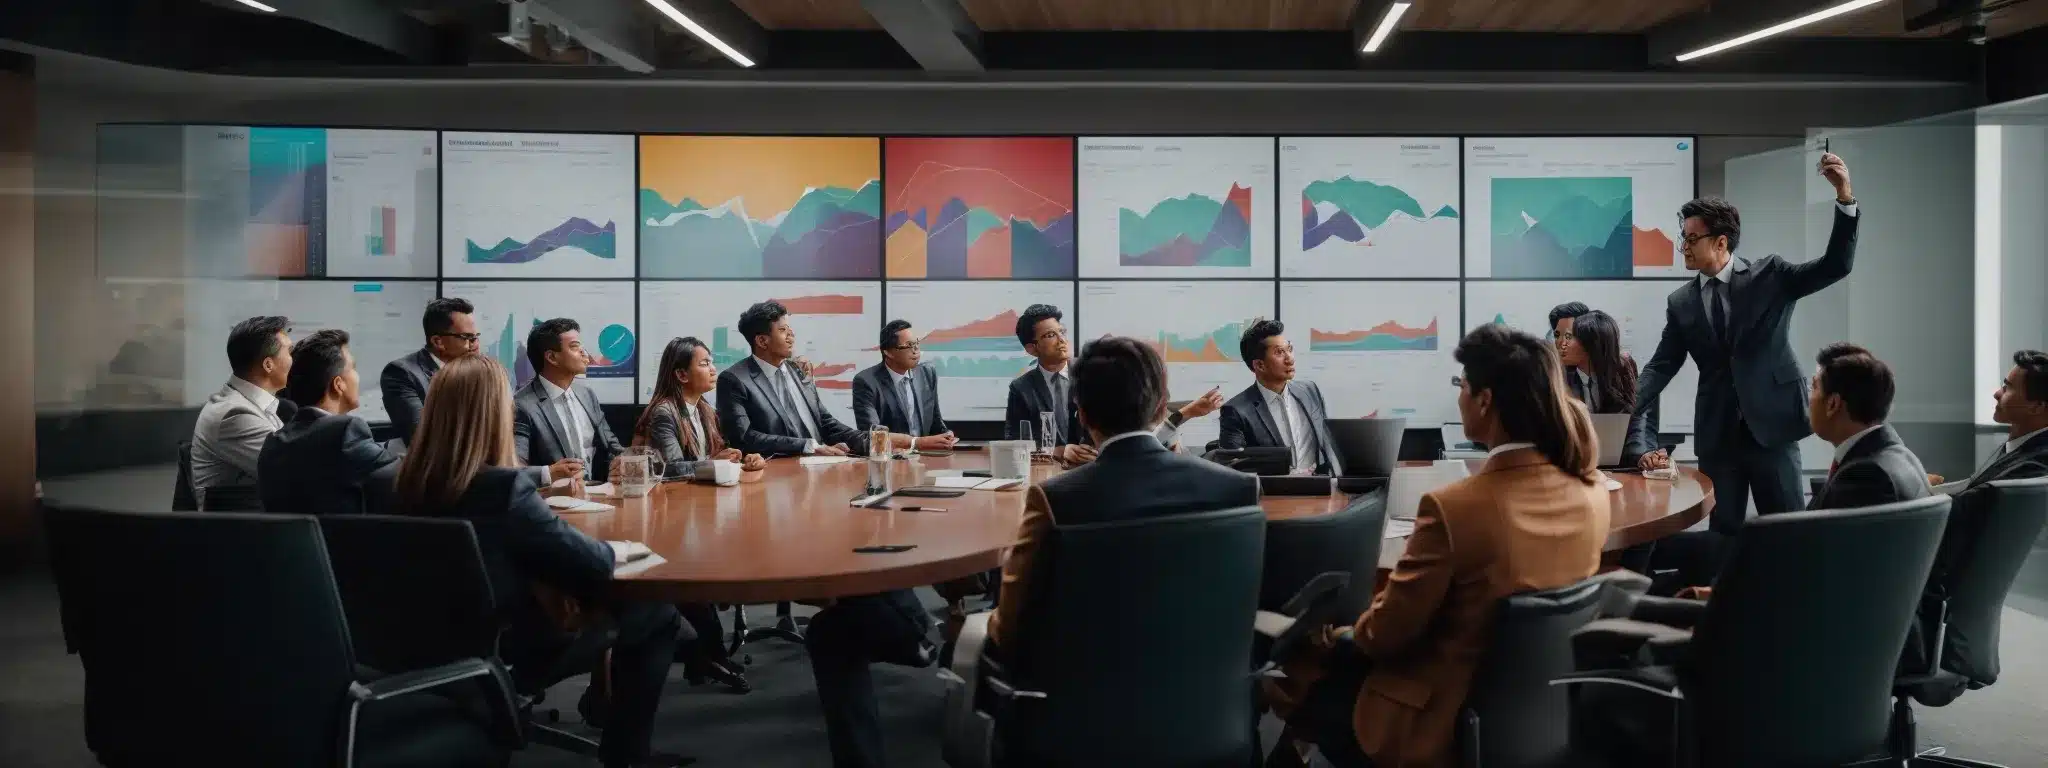 A Boardroom With Enthusiastic Professionals Discussing Over A Large Screen Displaying Vibrant Marketing Graphs.